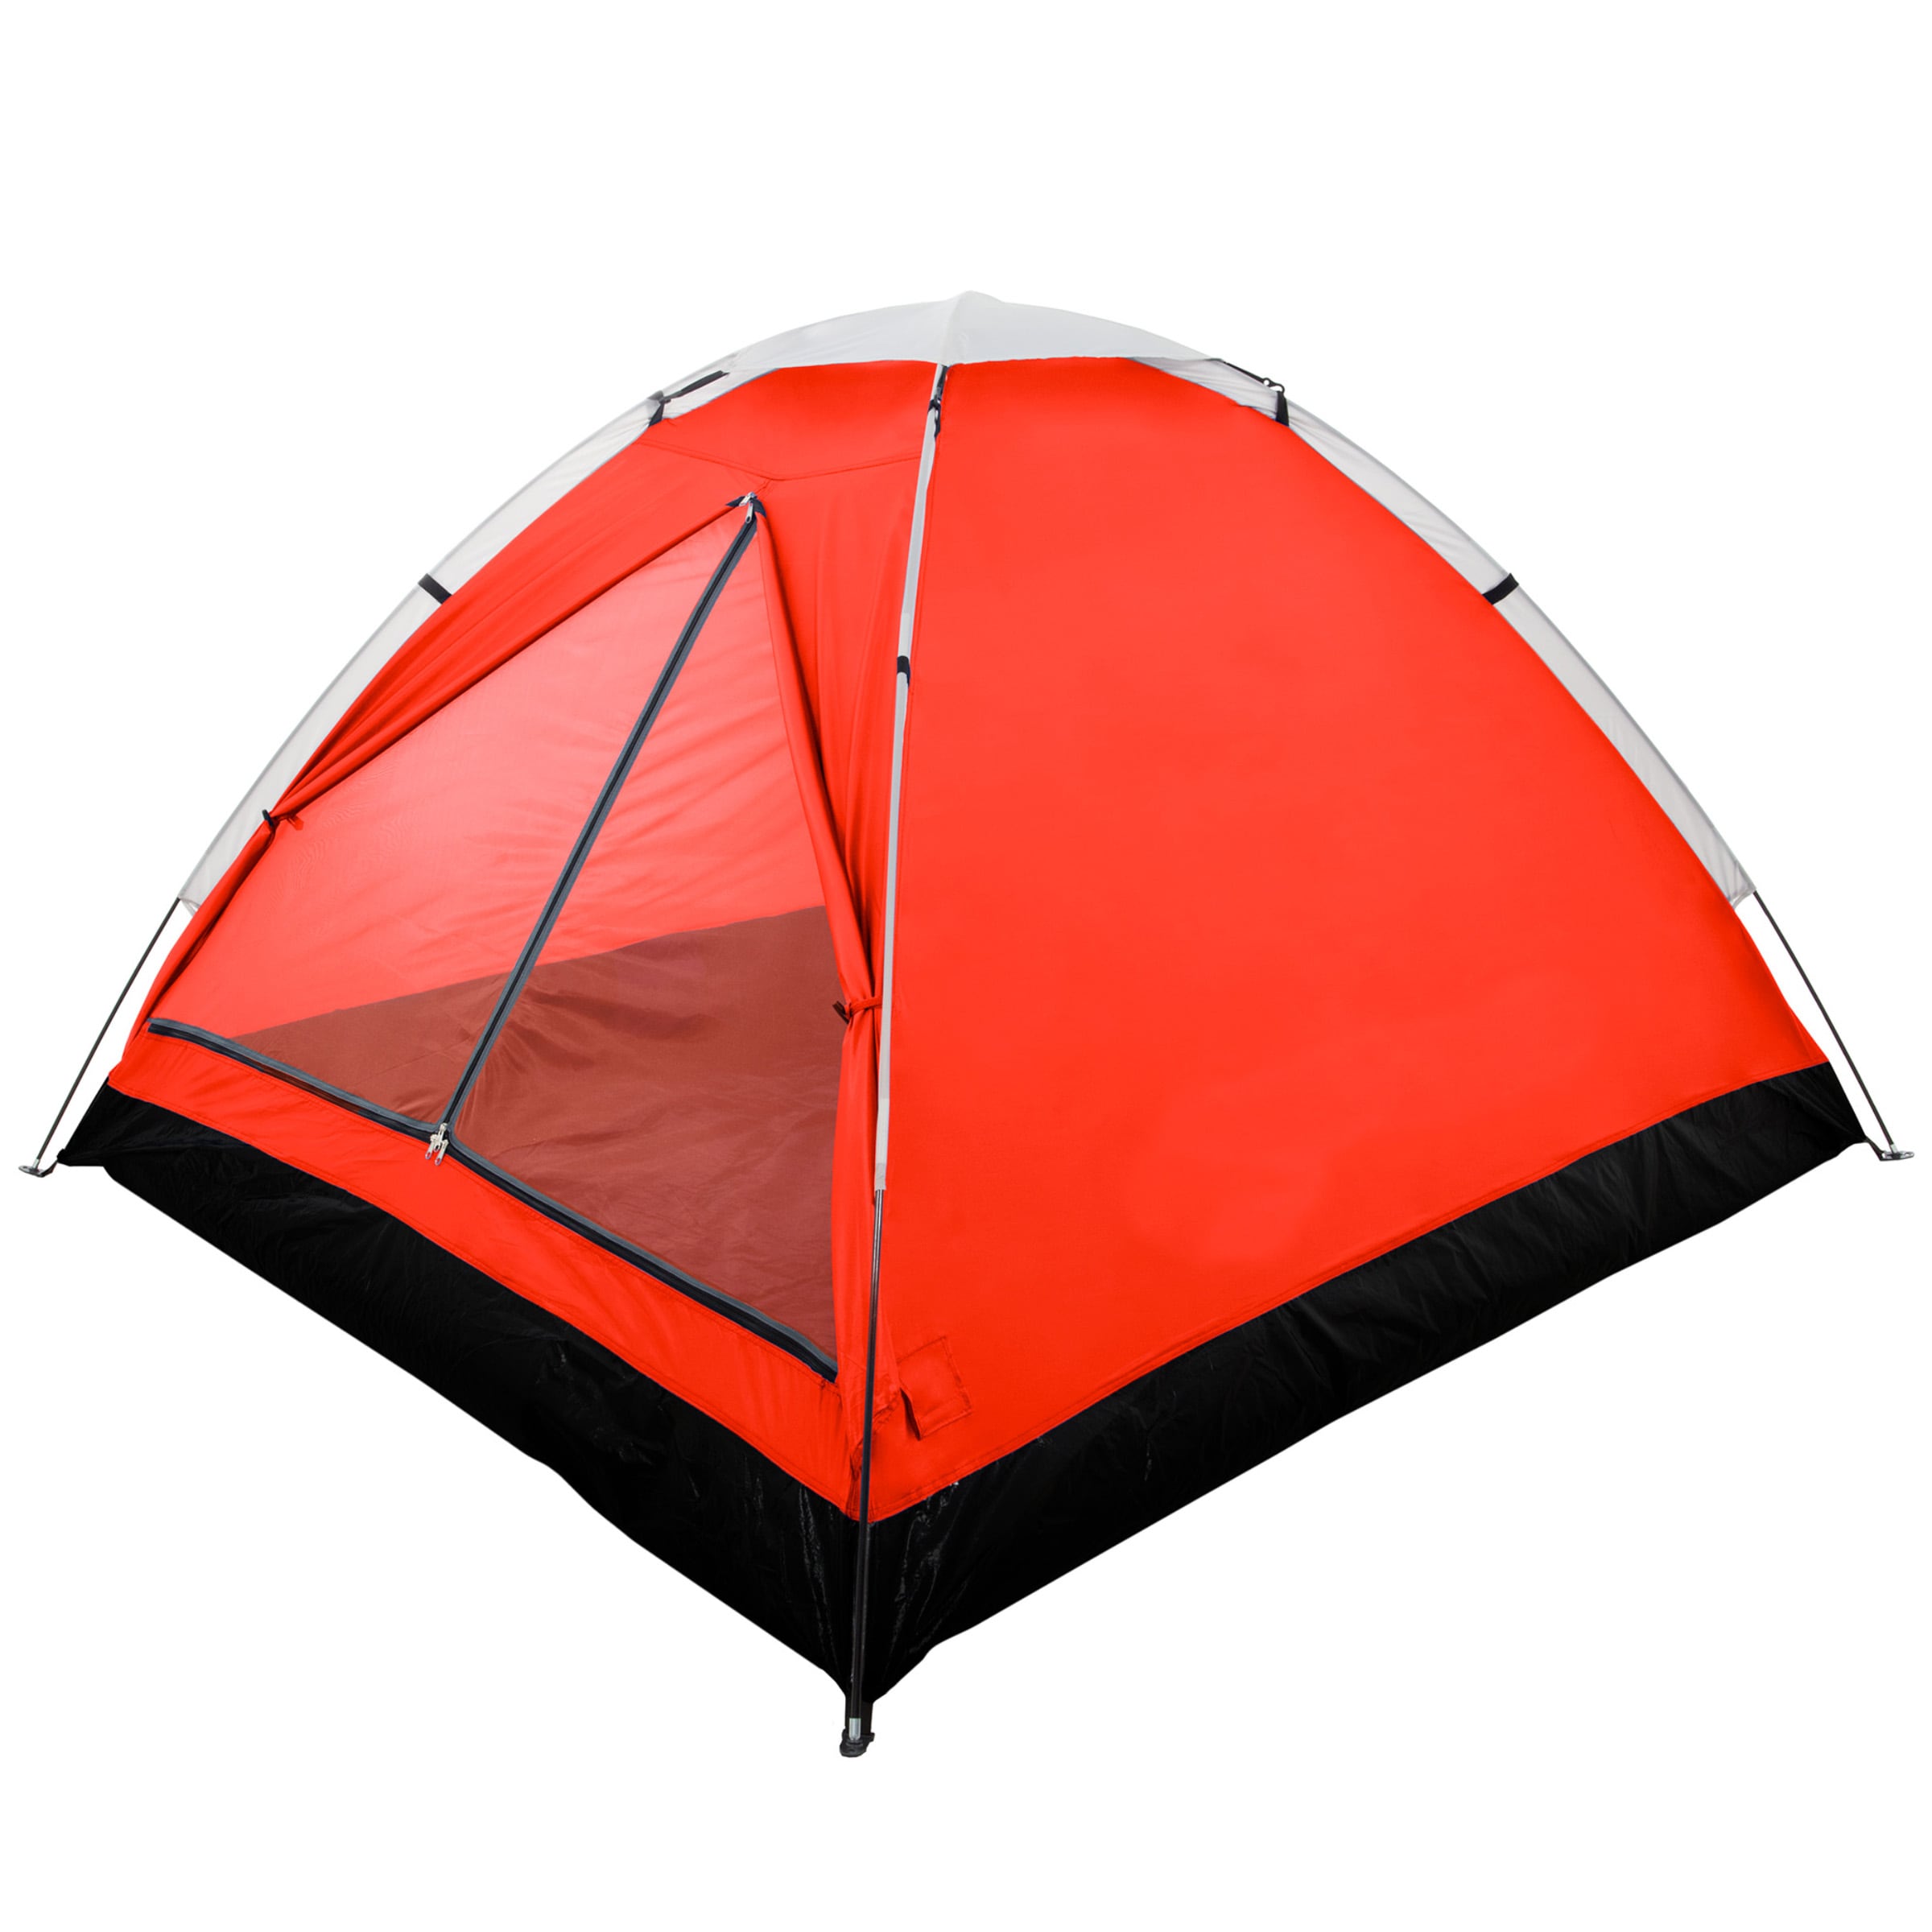 Leisurewize Camping Fishing Festival Awning 2 Man Person Double Bed Pop Up Tent 